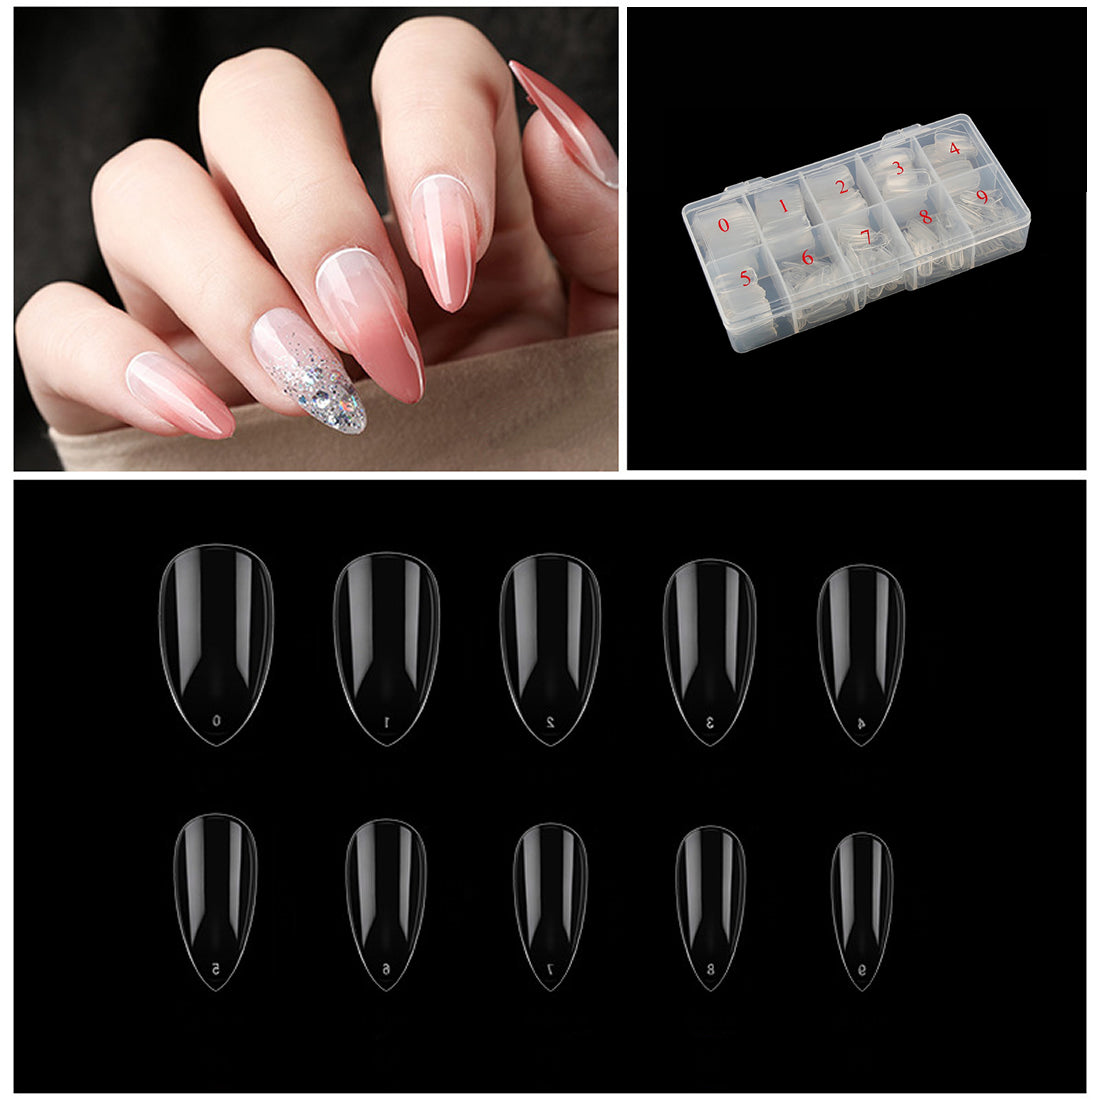 Gleevia Artificial Unbreakable Clear Short Stiletto Nail Tips Finger Nail Extension 500pc/Box